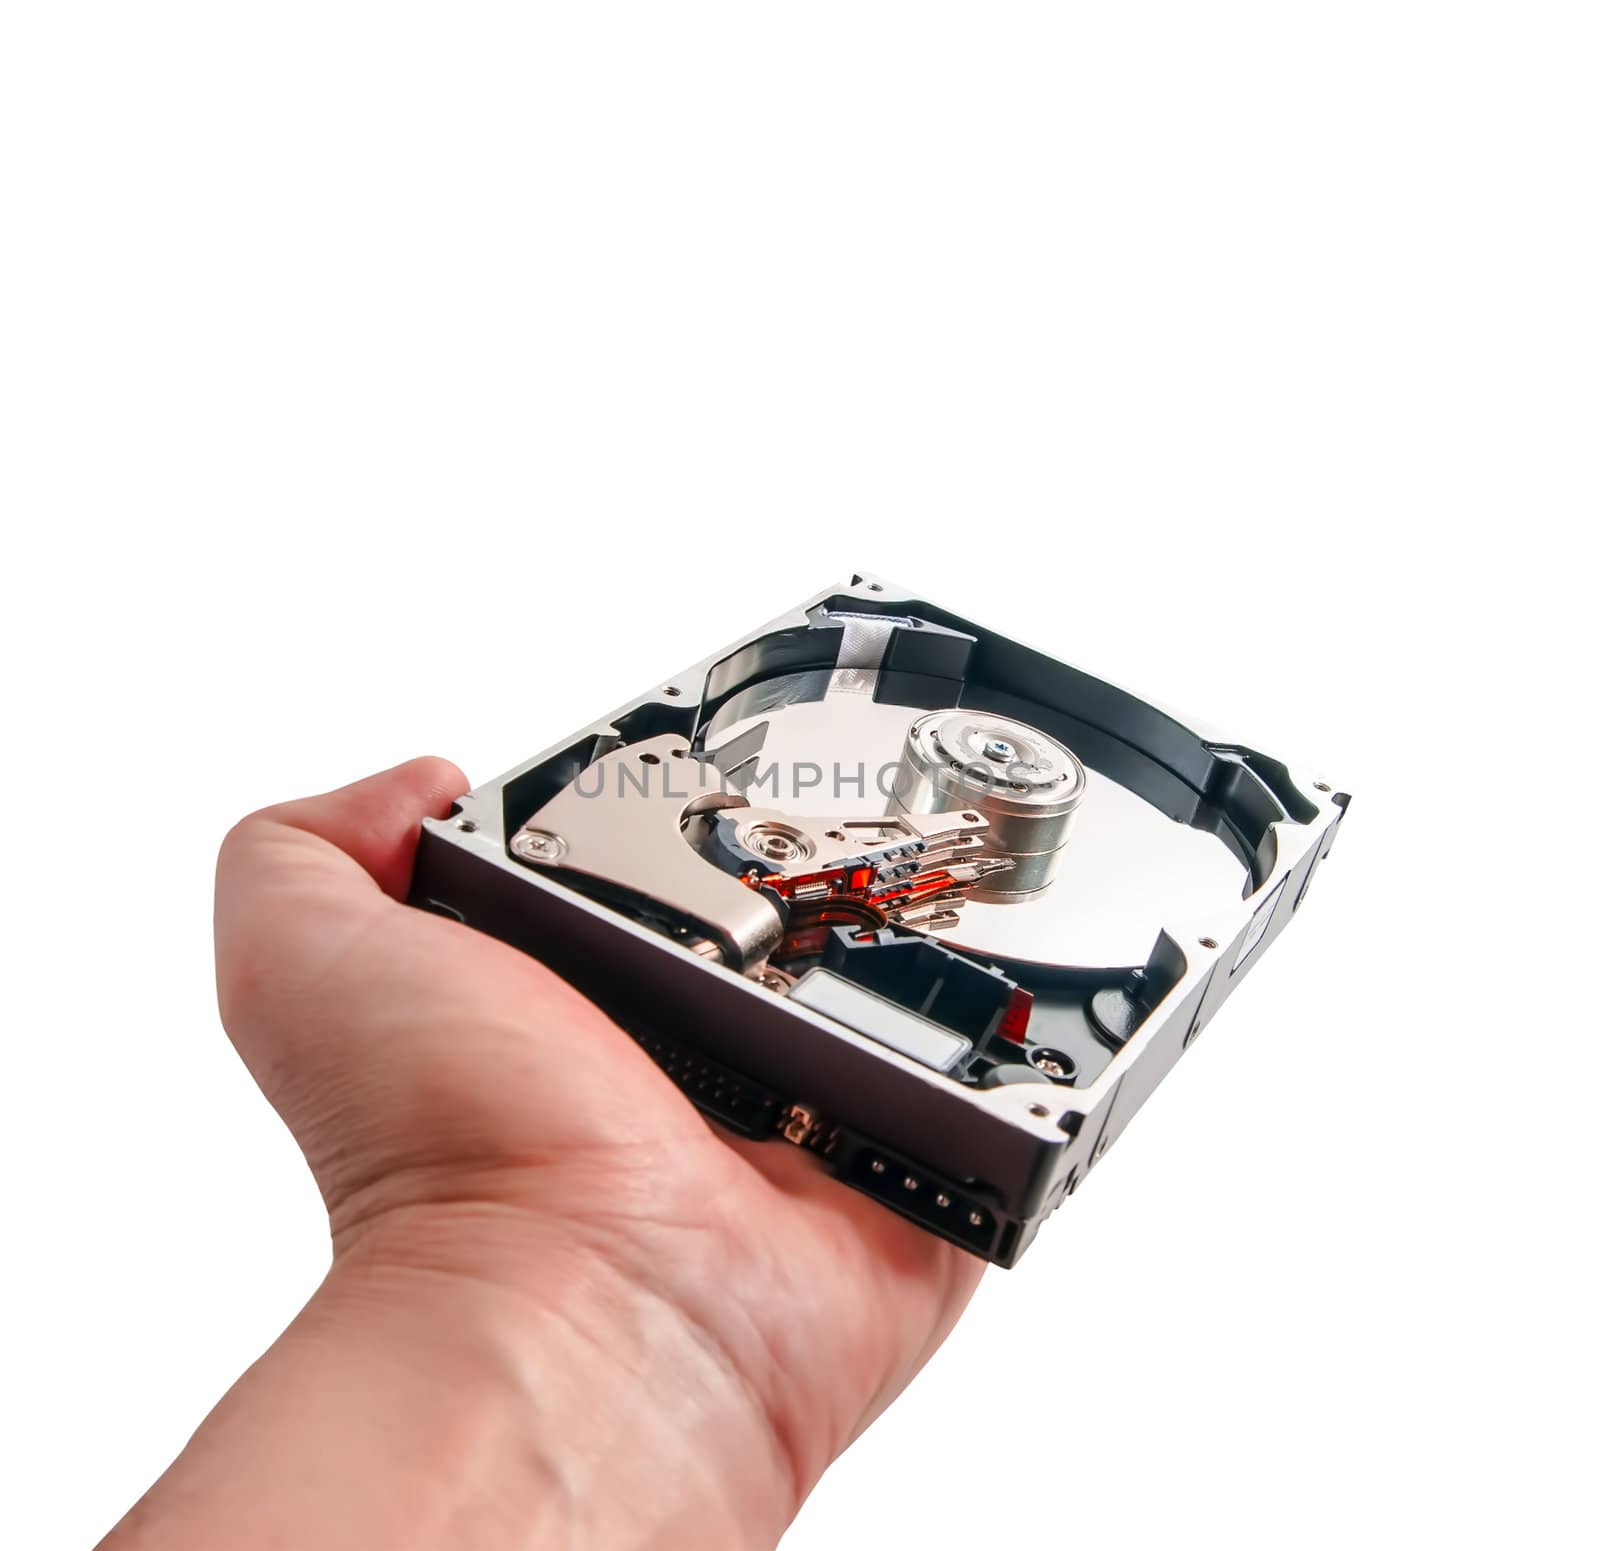 hard disk in hand isolated on a white background